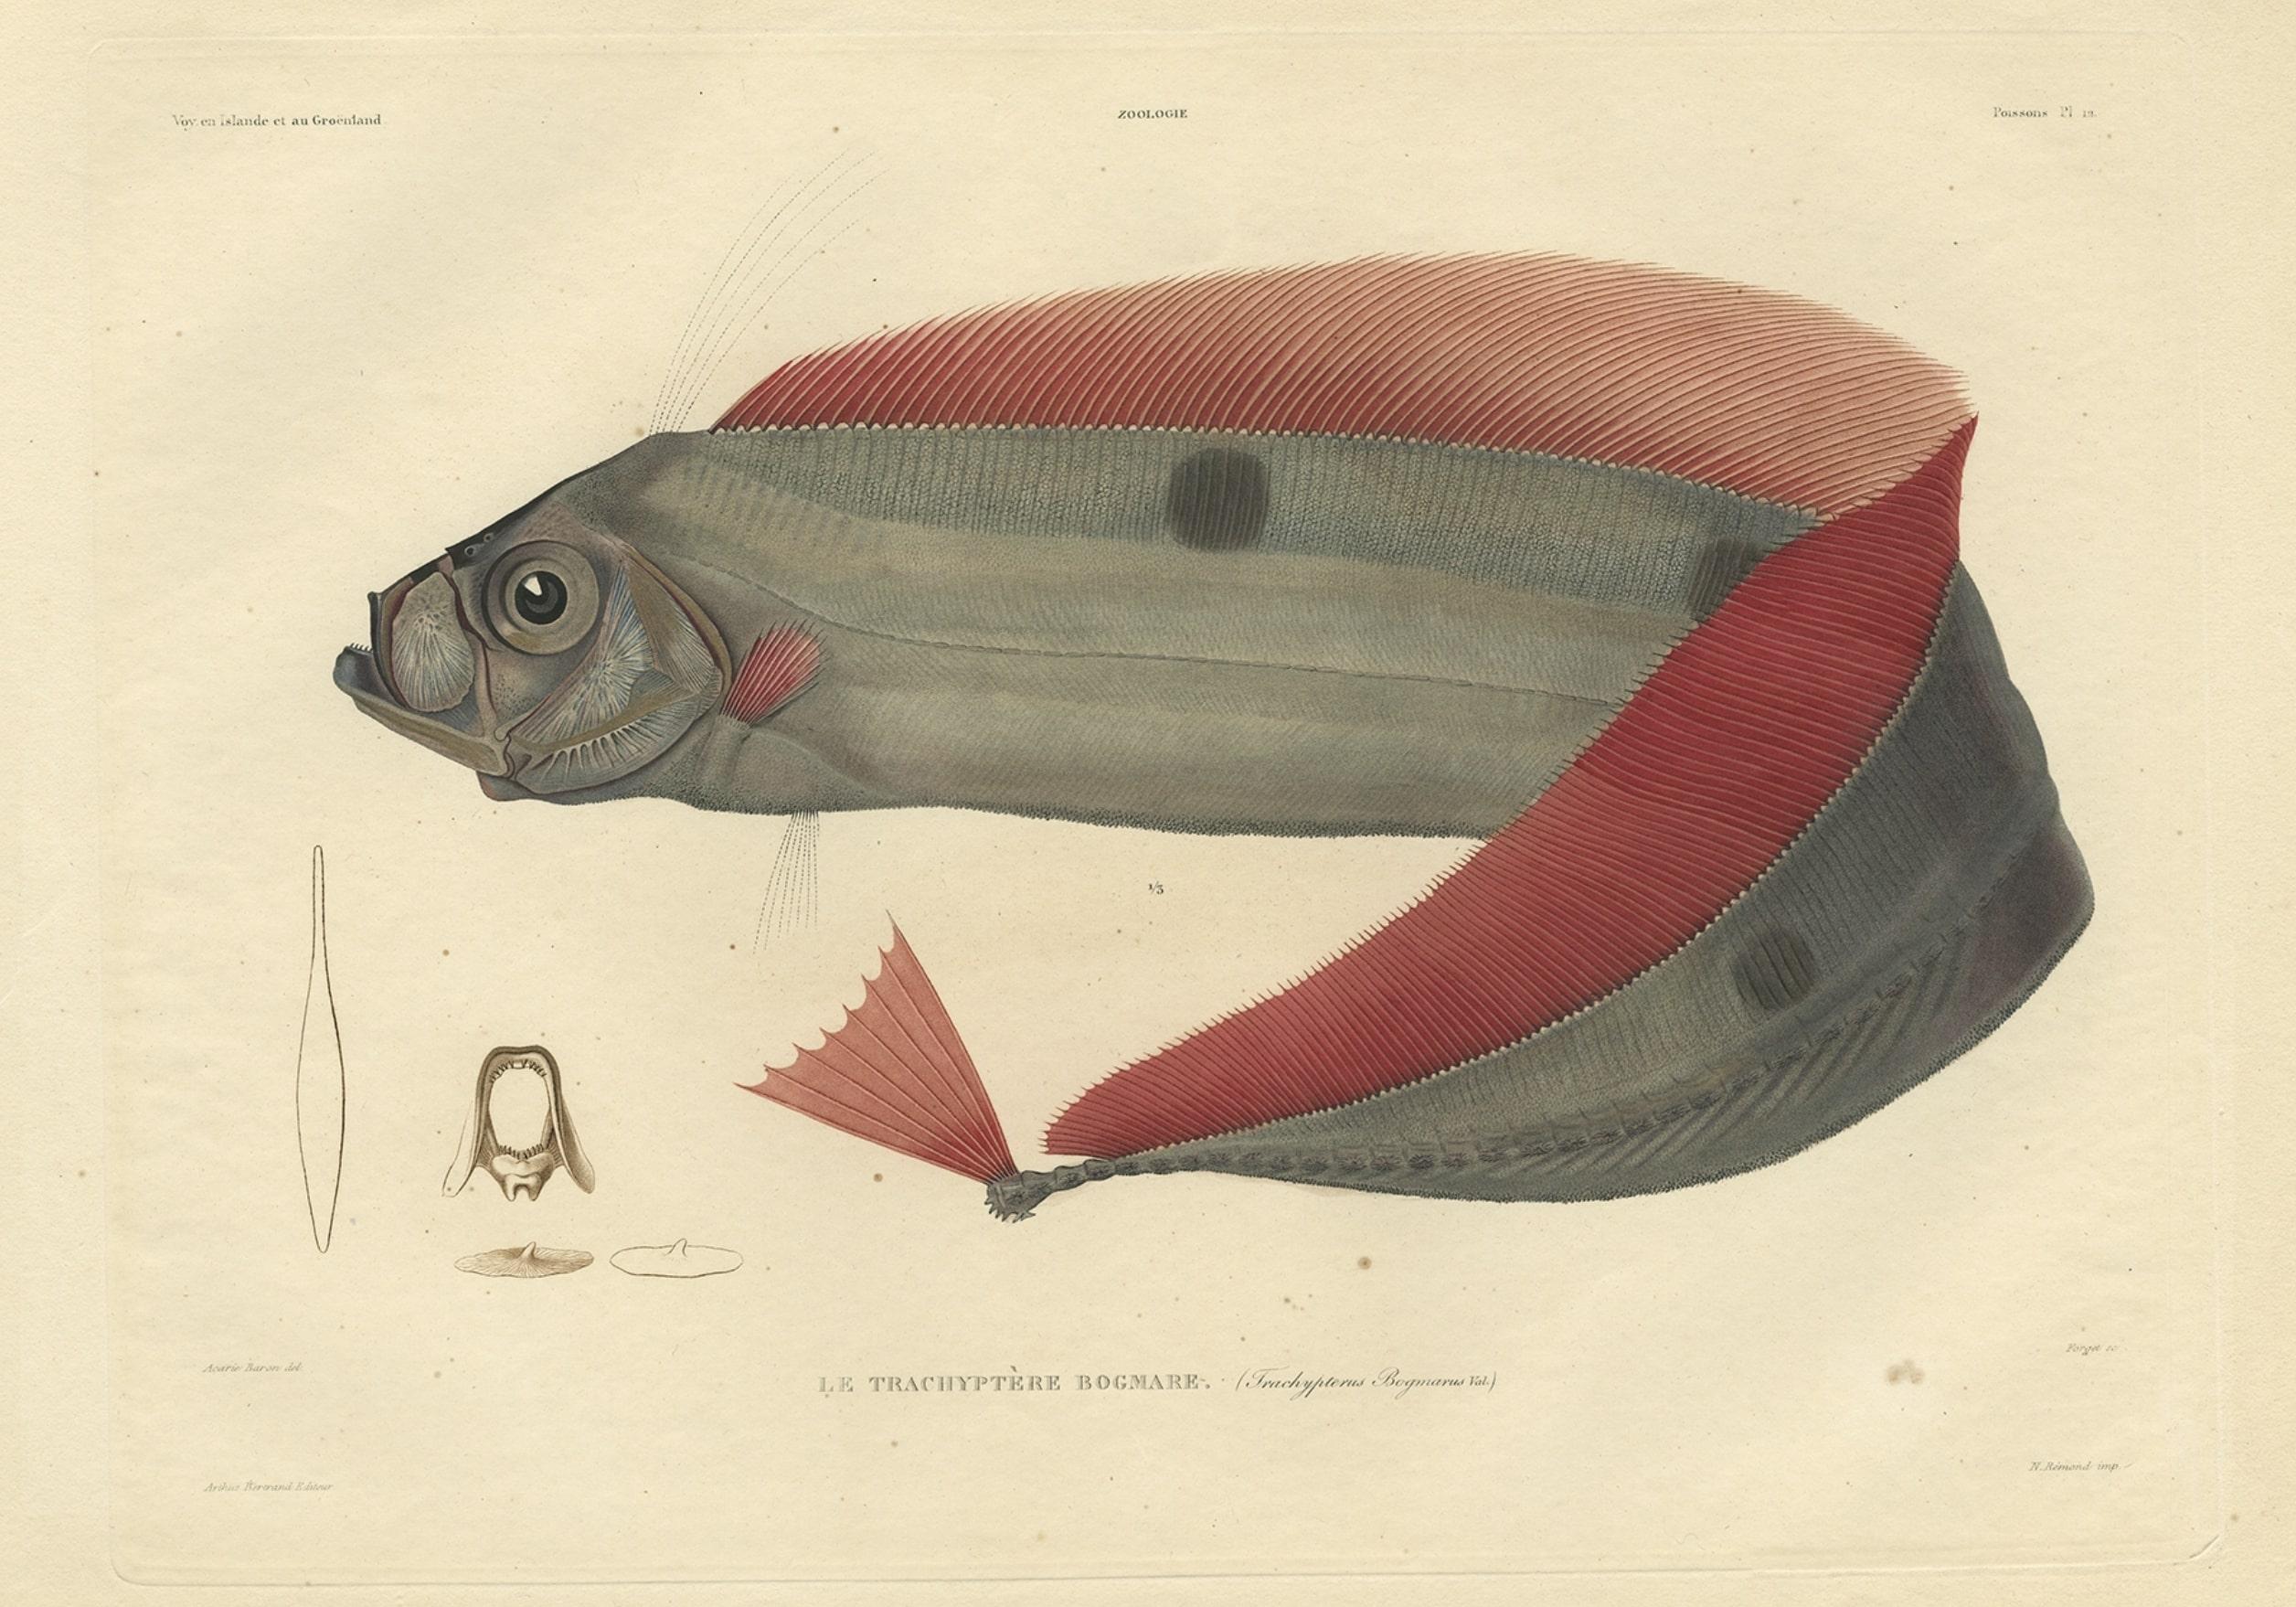 Antique print, titled: 'Poissons Plate 12 - Le Trachyptere Bogmare (Trachypterus bogmarus).' 

This rare plate shows the Trachipterus trachypterus, a ribbonfish of the family Trachipteridae. From: 'Voyage en Islande et au Groenland' by M. Paul